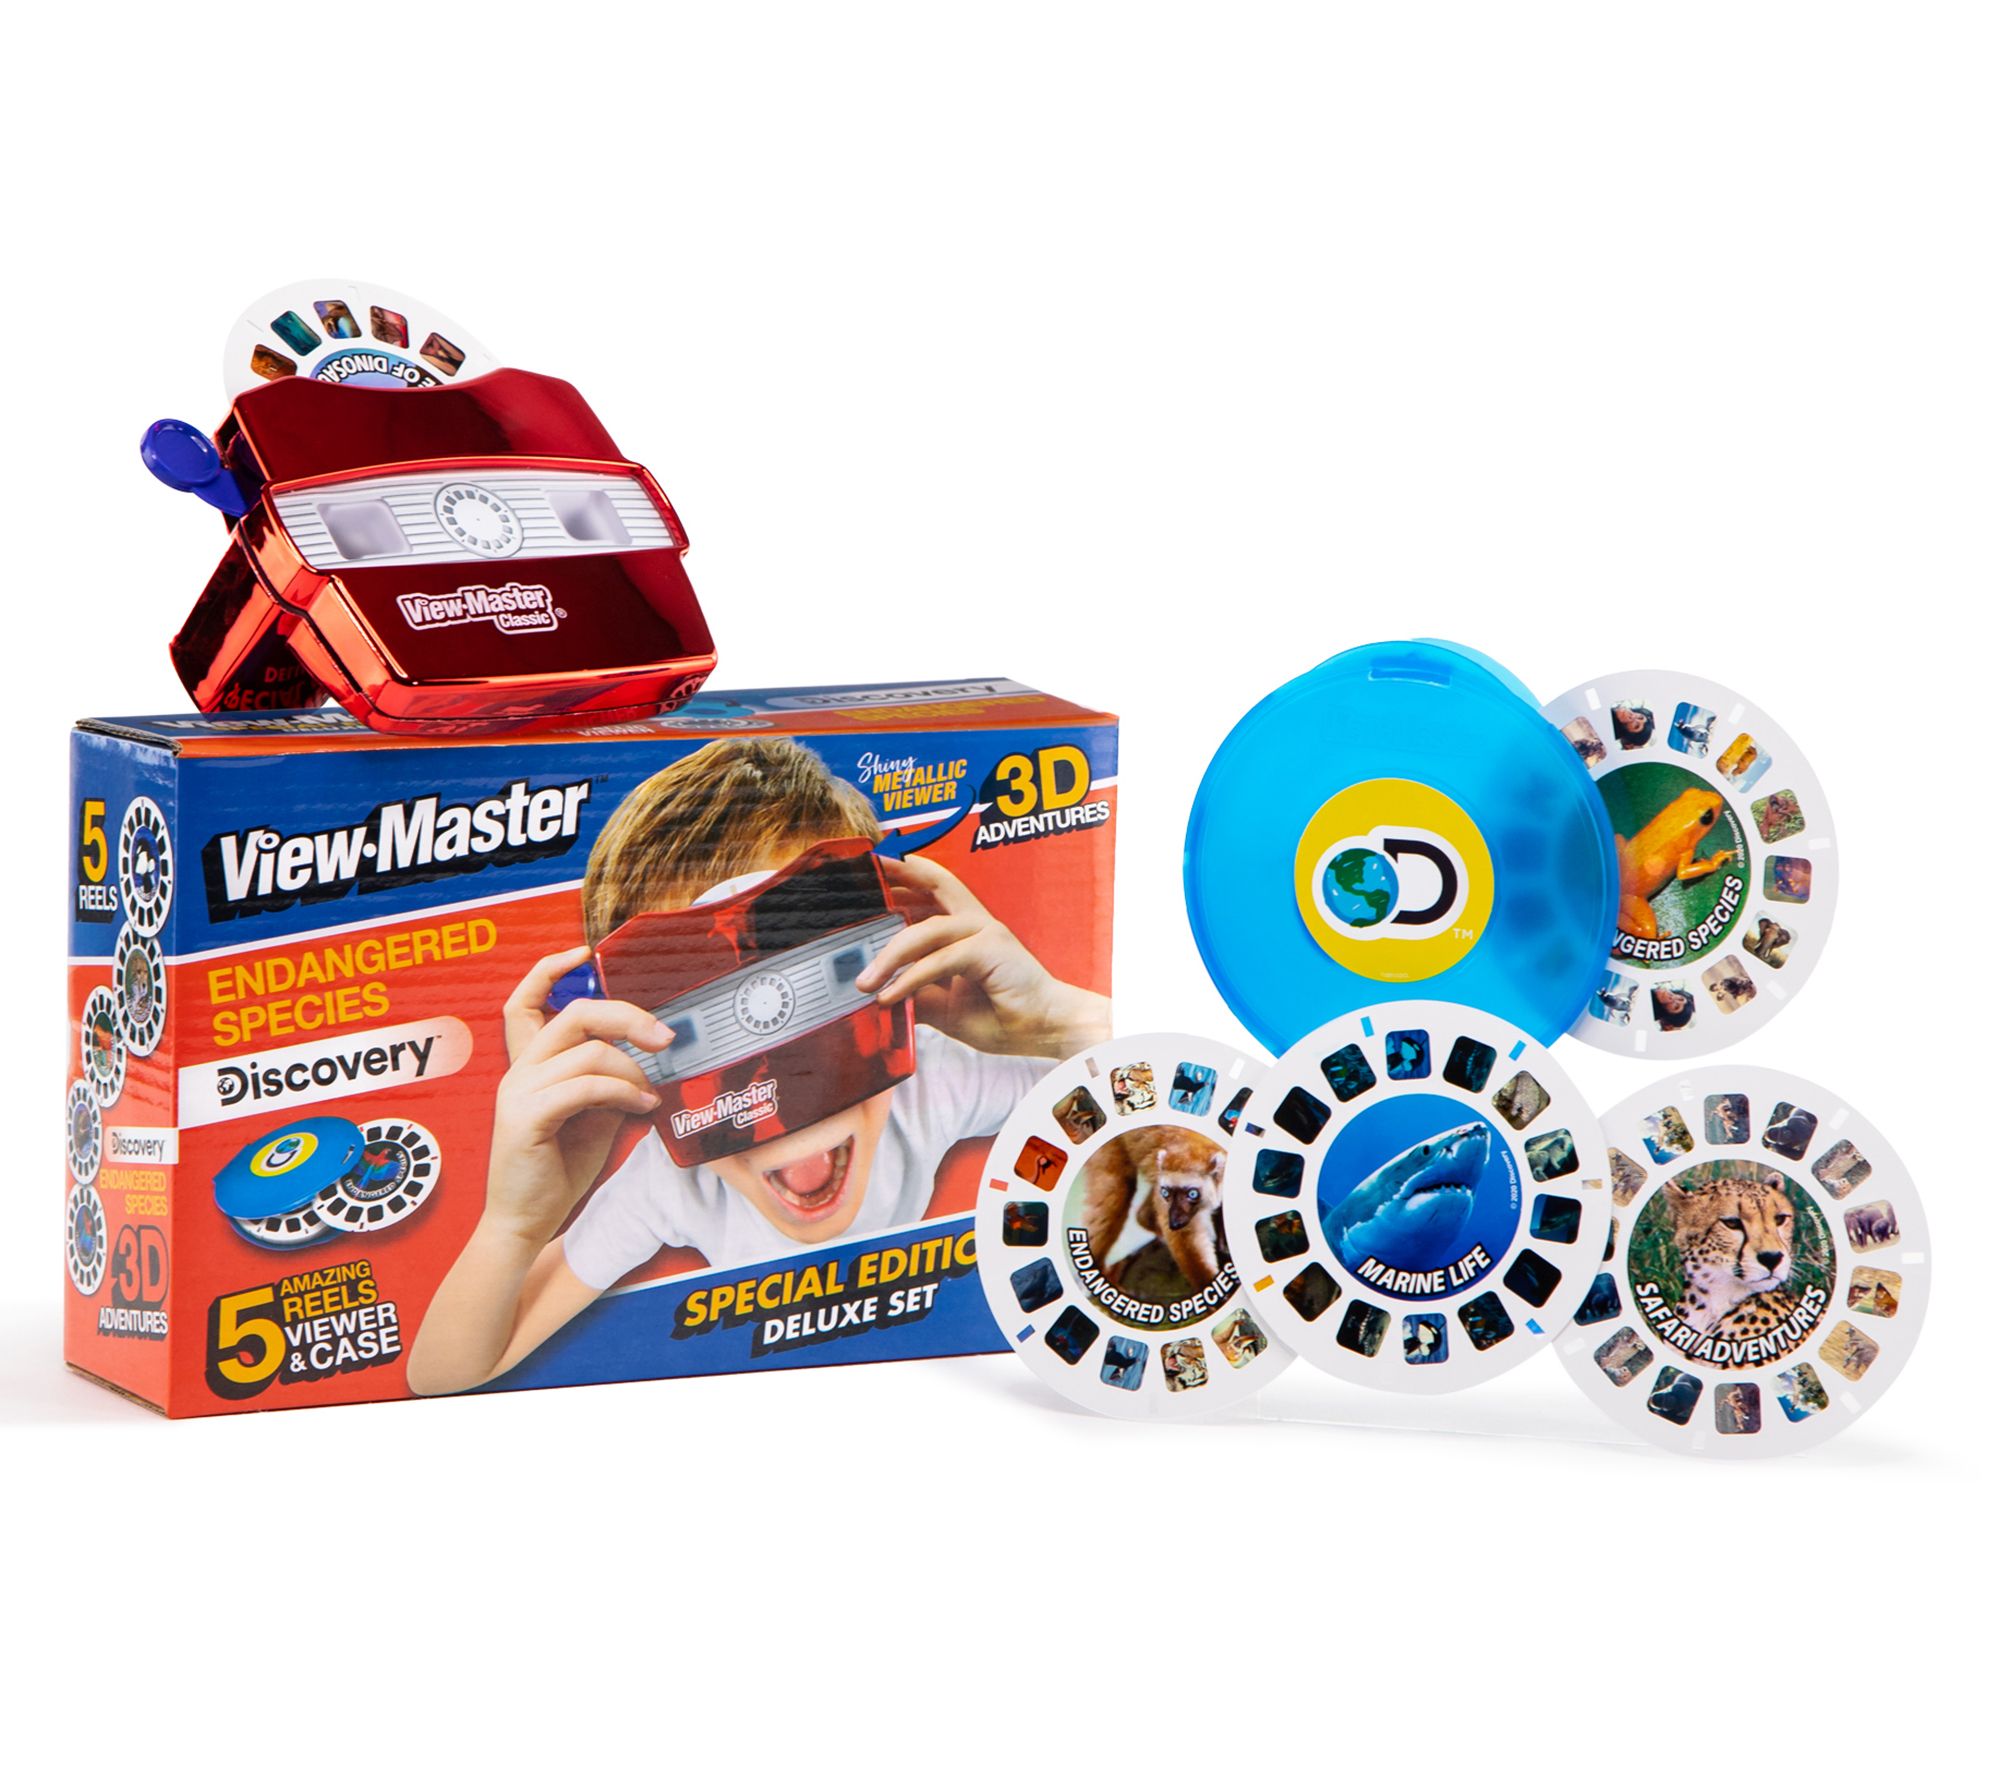 View Masters!